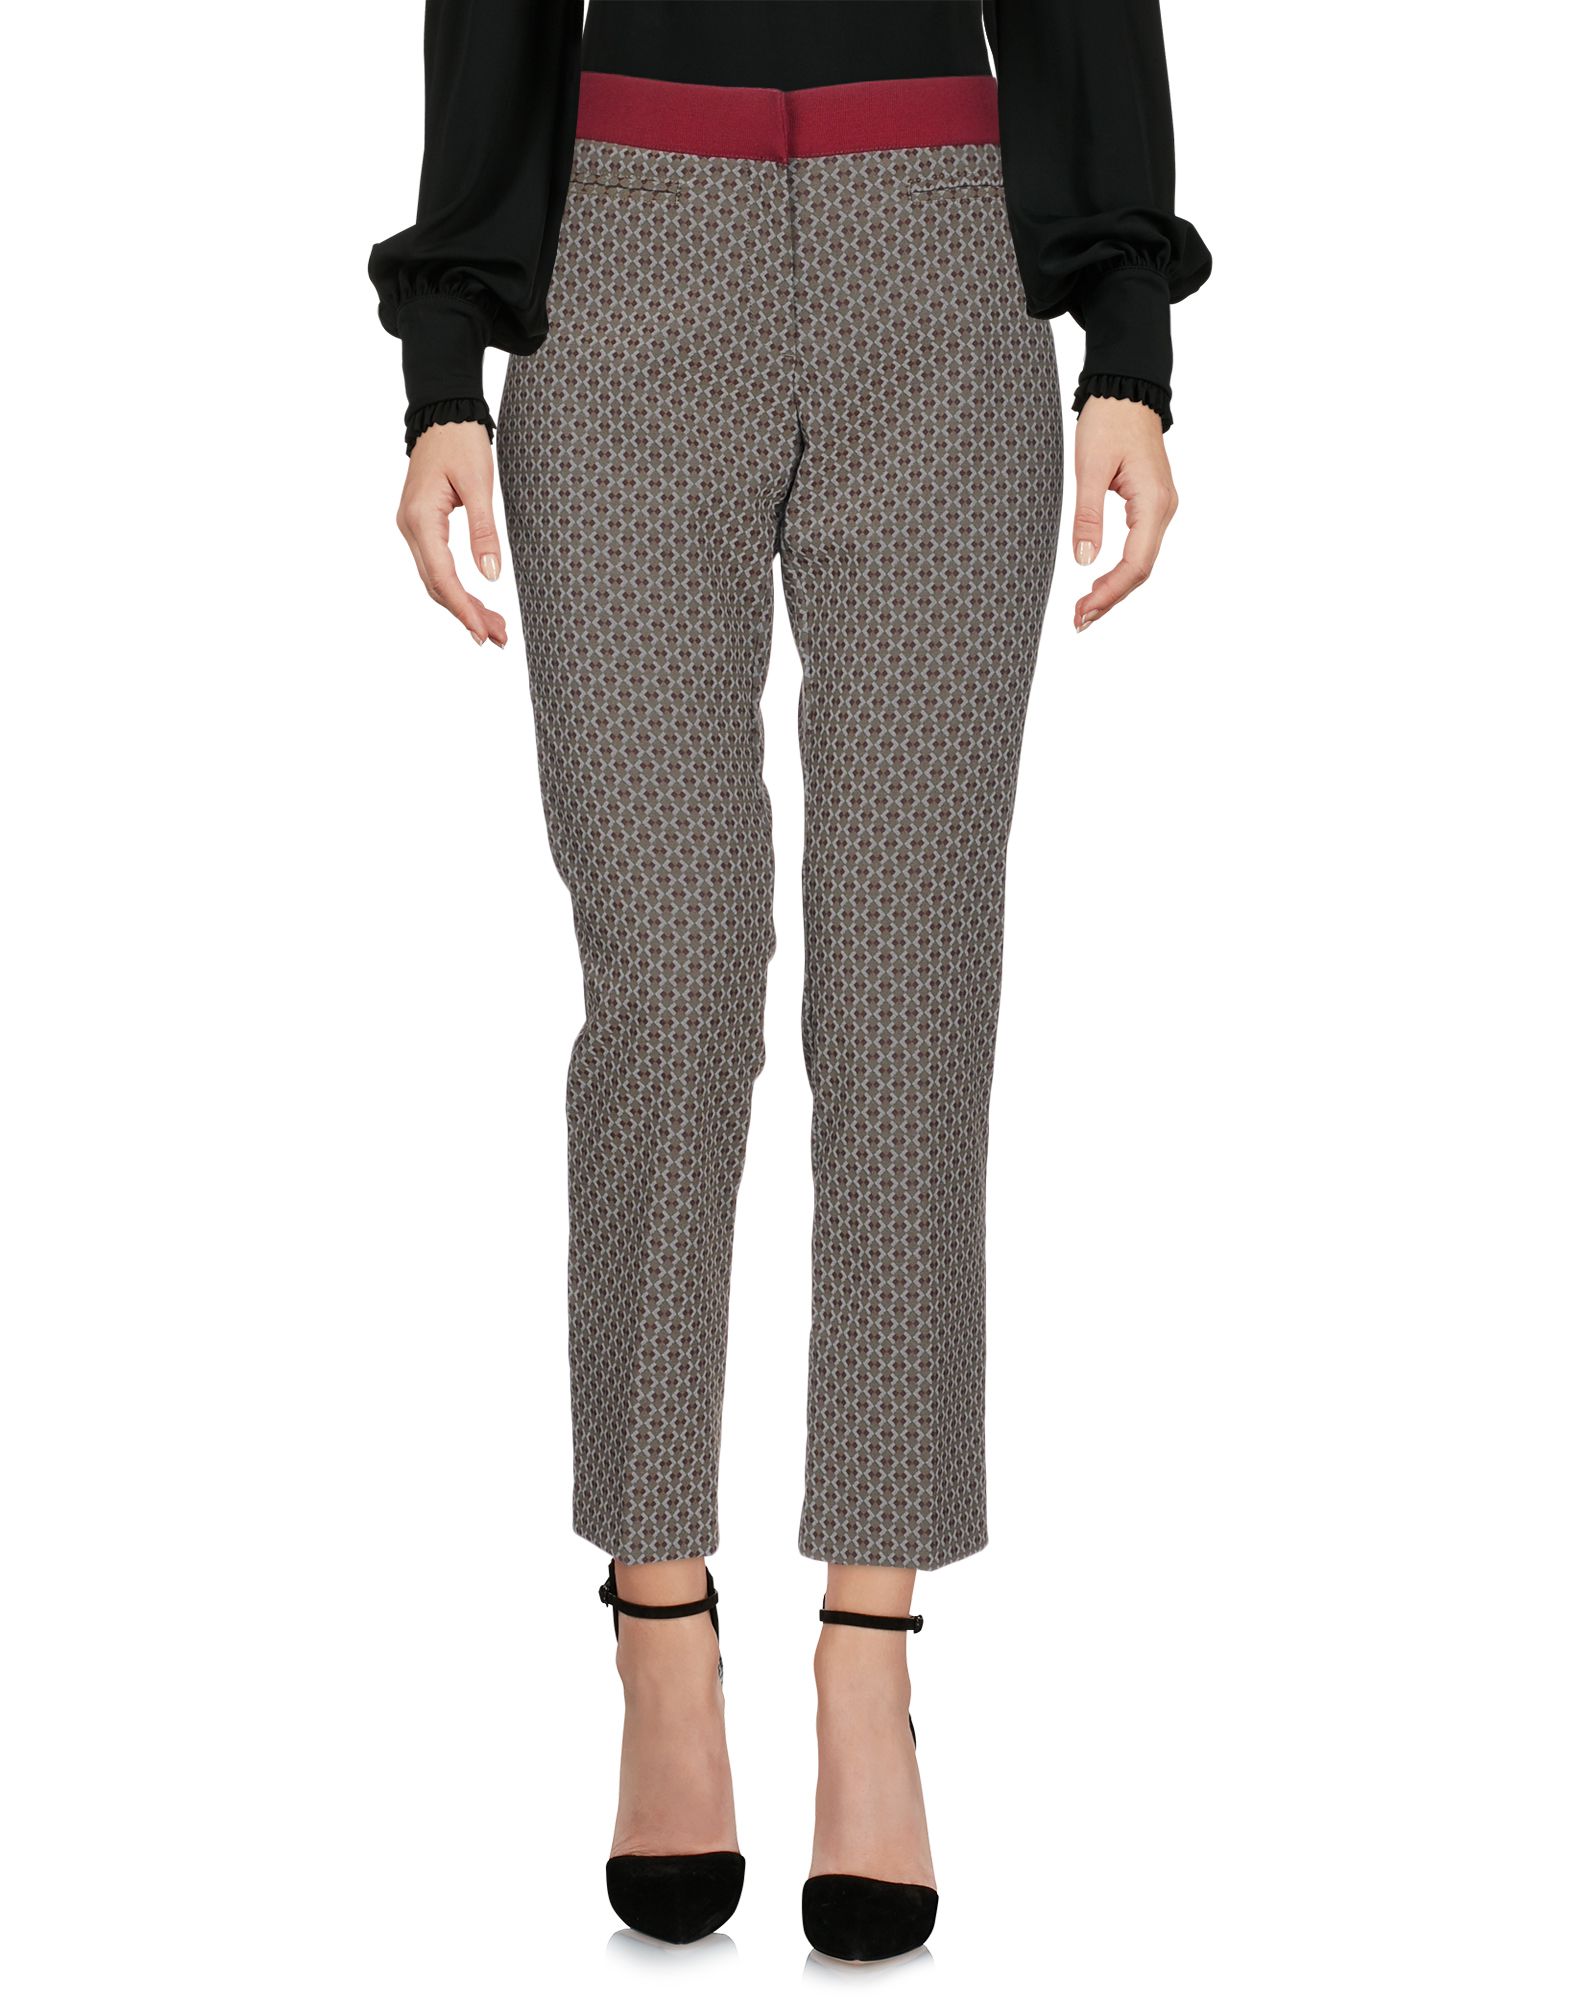 TERESA DAINELLI CROPPED PANTS & CULOTTES,13208431KT 3